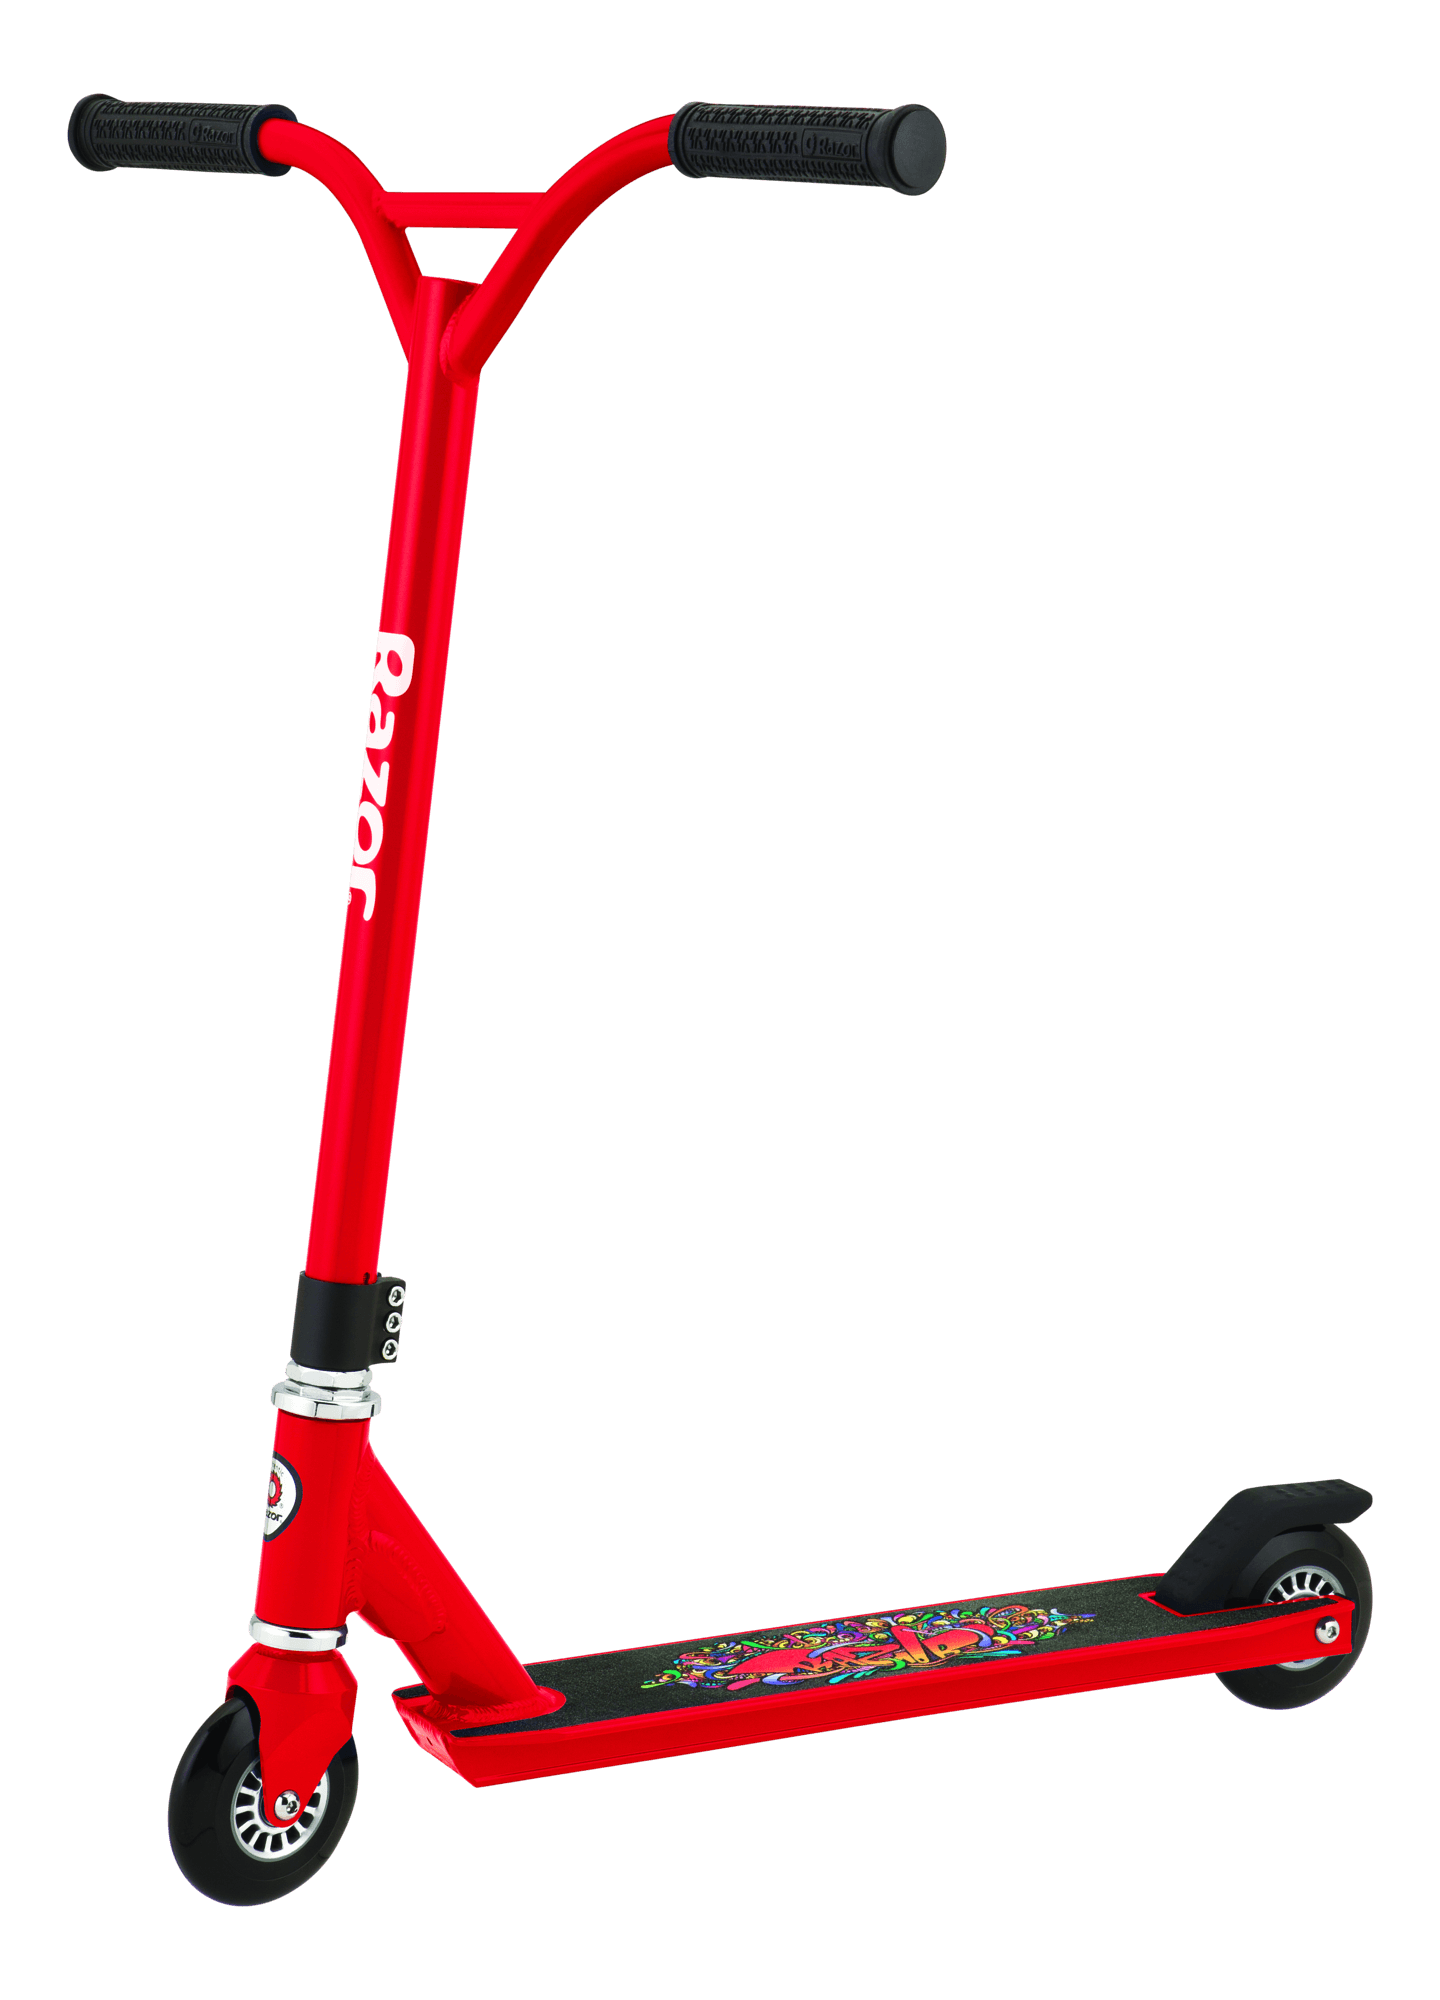 Scooter PNG-Afbeelding